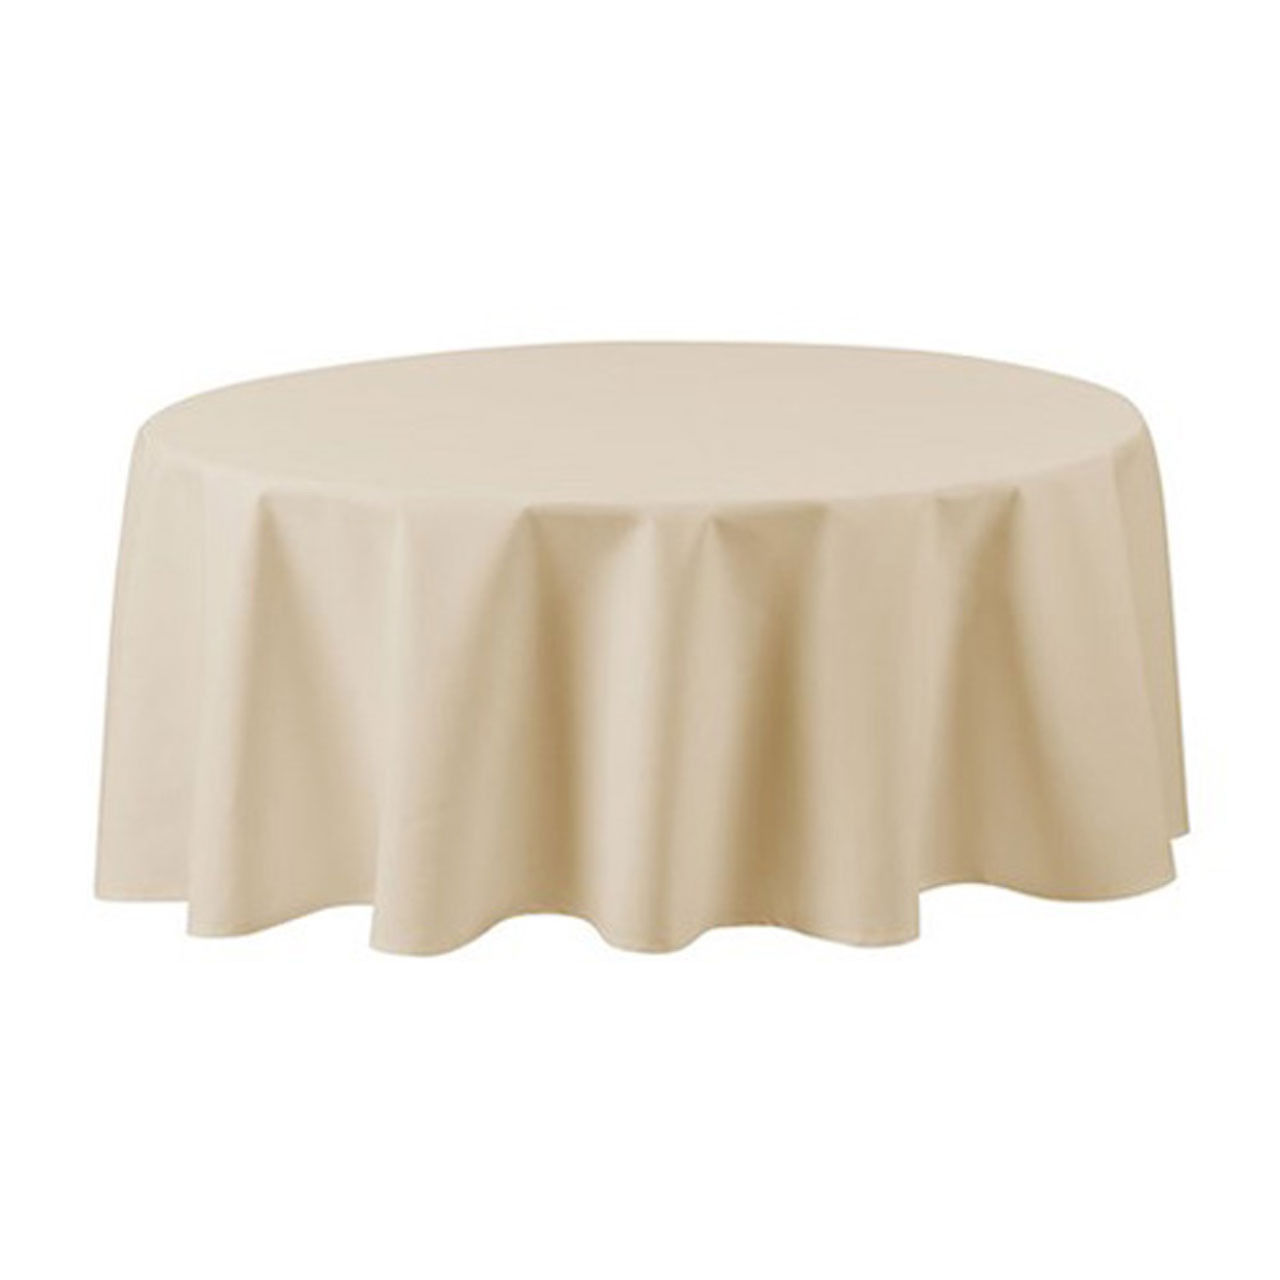 How many inches should a tablecloth hang over the edge?